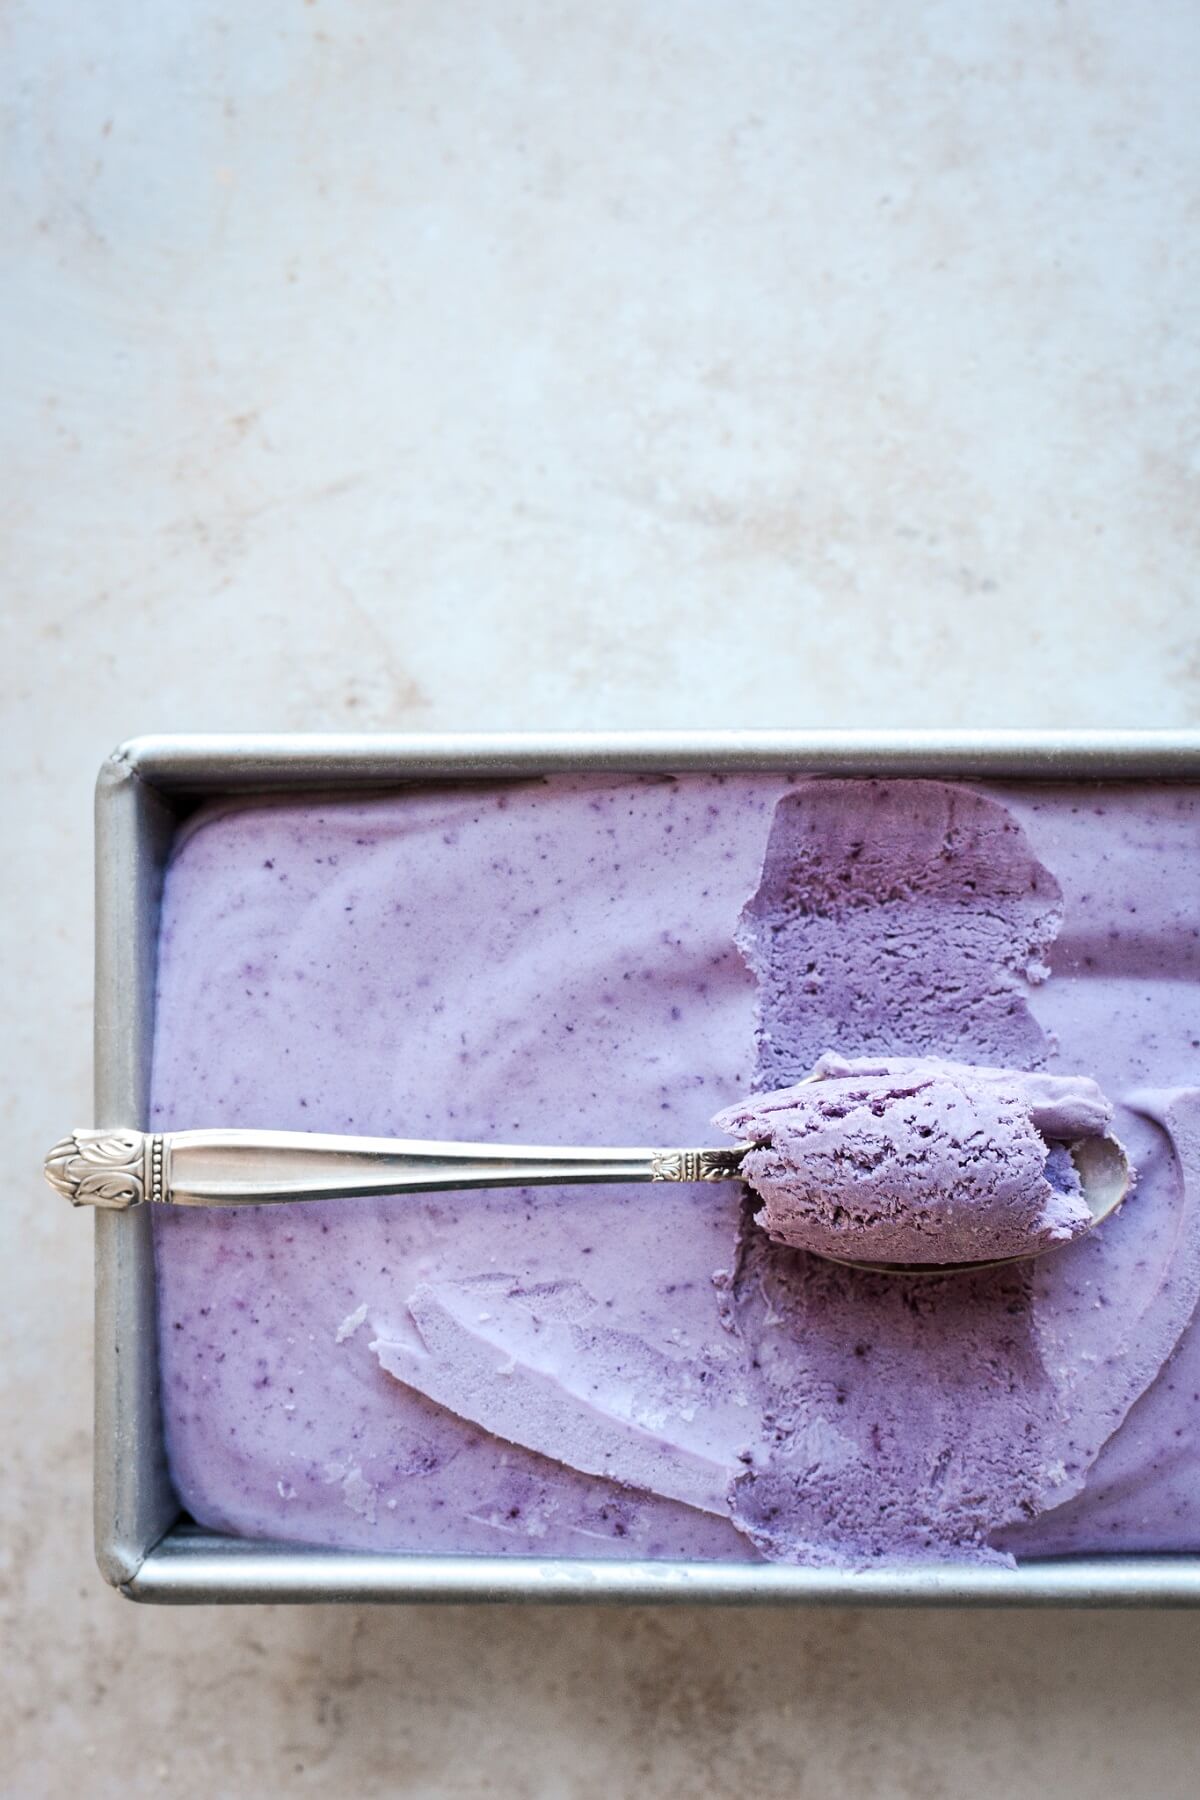 A spoonful of blueberry ice cream.